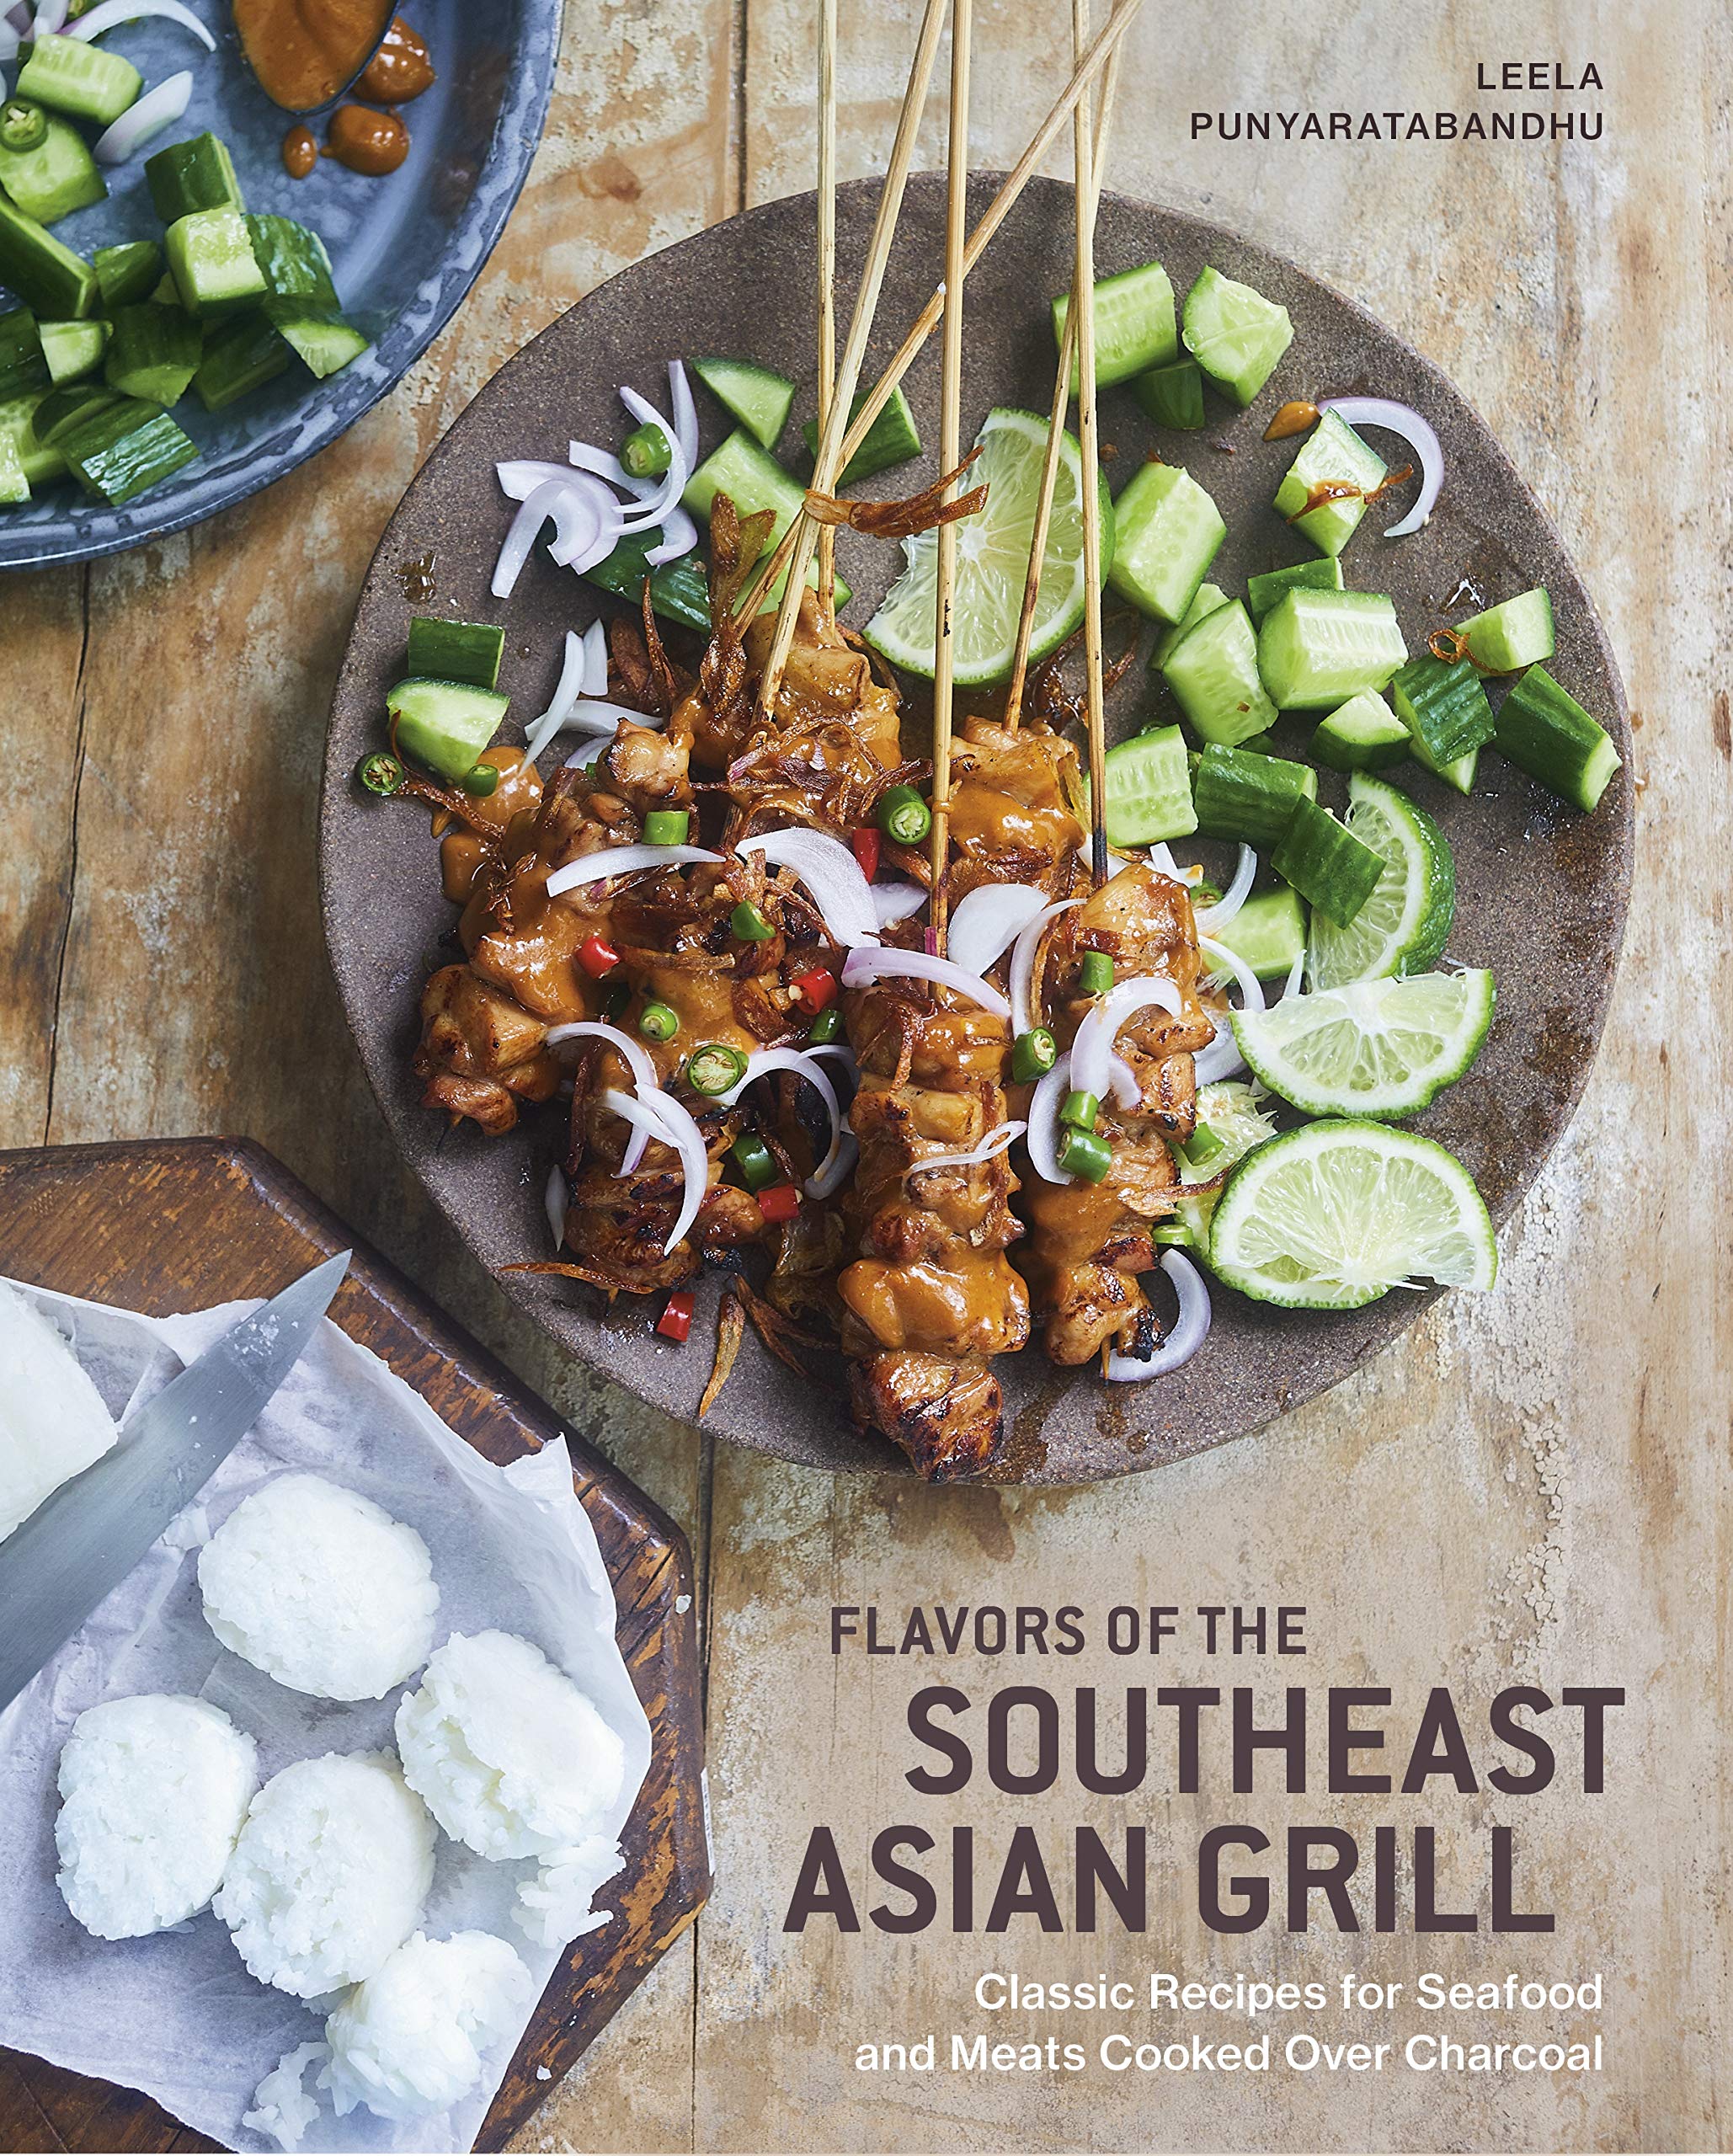 Flavors of the Southeast Asian Grill: Classic Recipes for Seafood and Meats Cooked over Charcoal (Leela Punyaratabandhu)